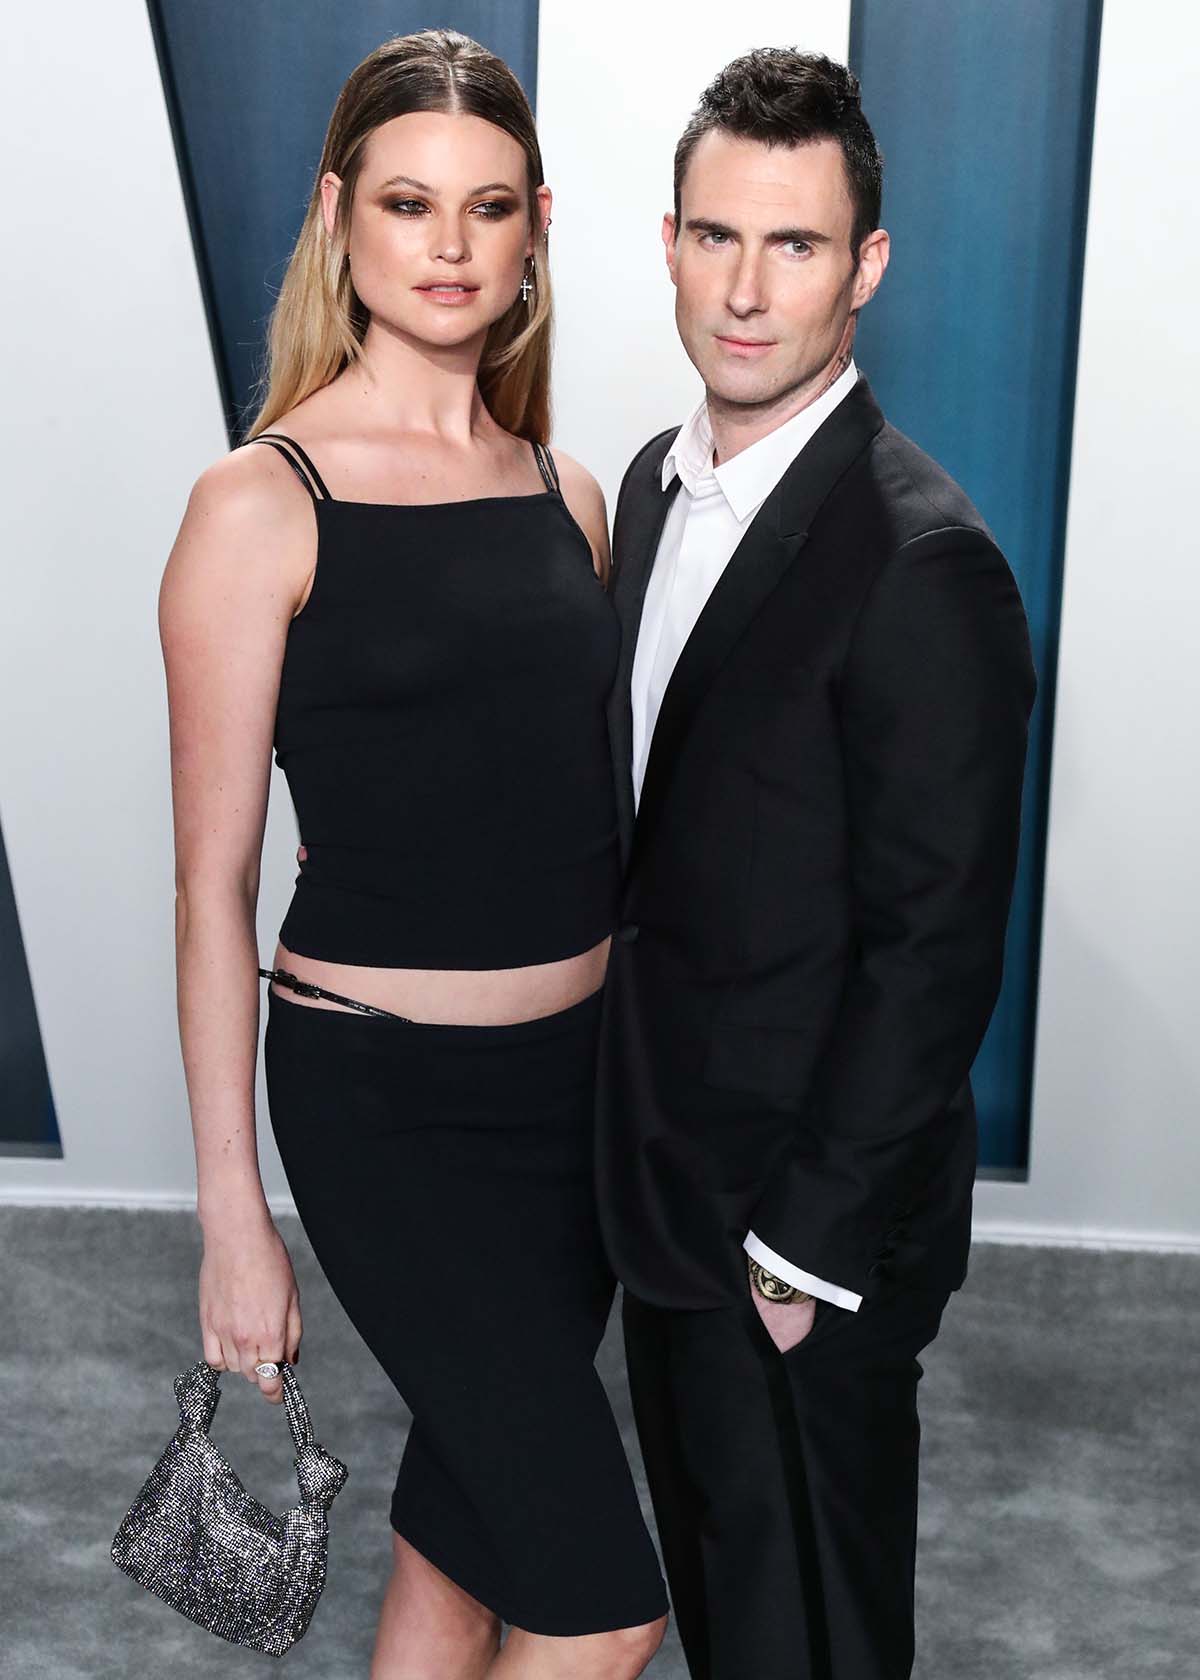 Adam Levine Breaks Silence on Claims He Cheated on Behati Prinsloo picture